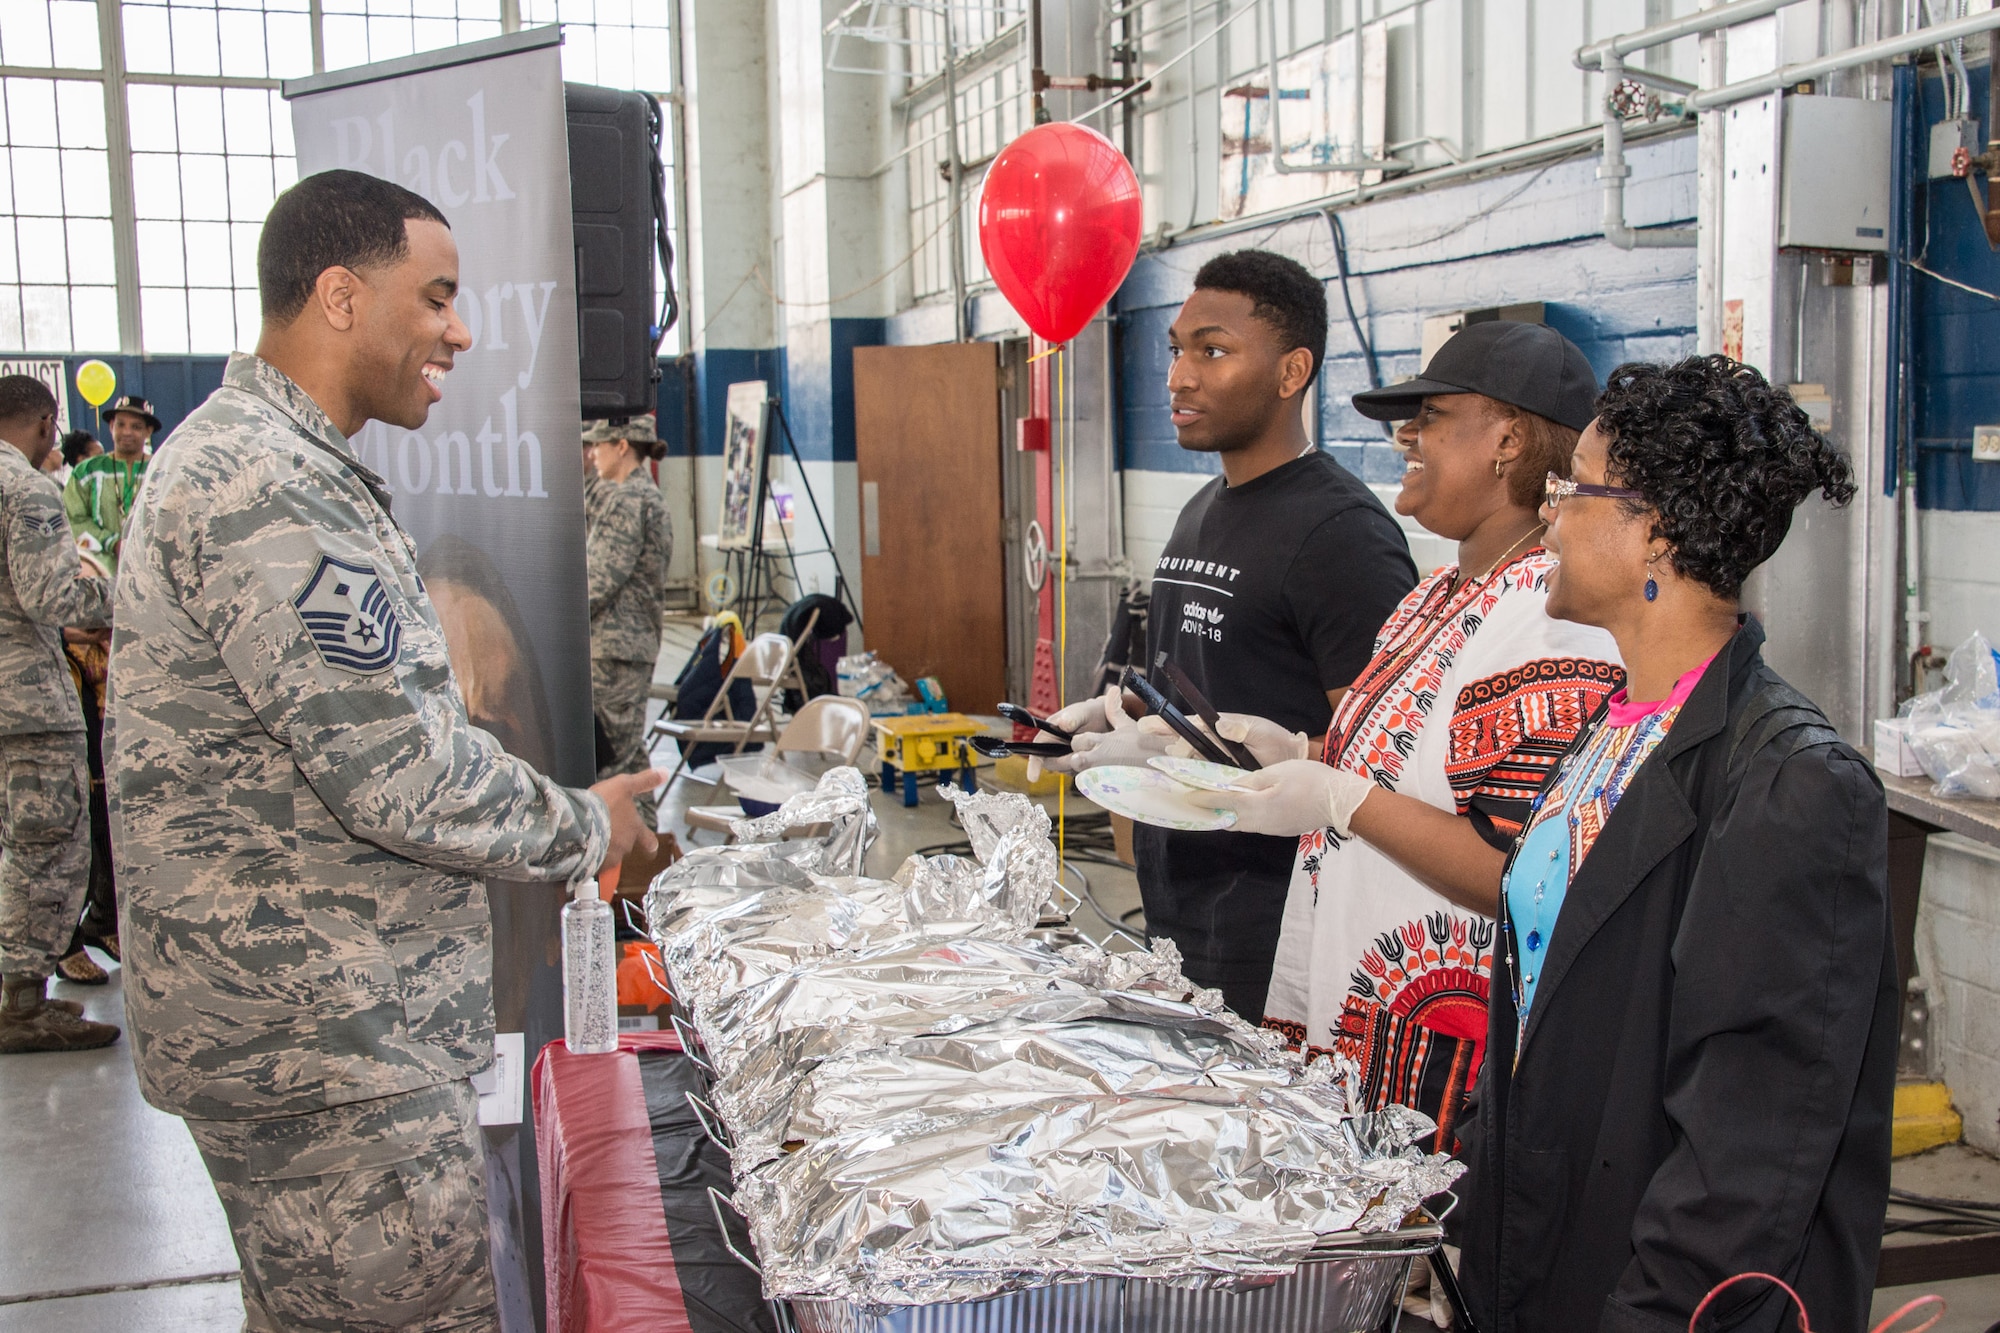 Highlighting the importance of diversity in today’s Air Force